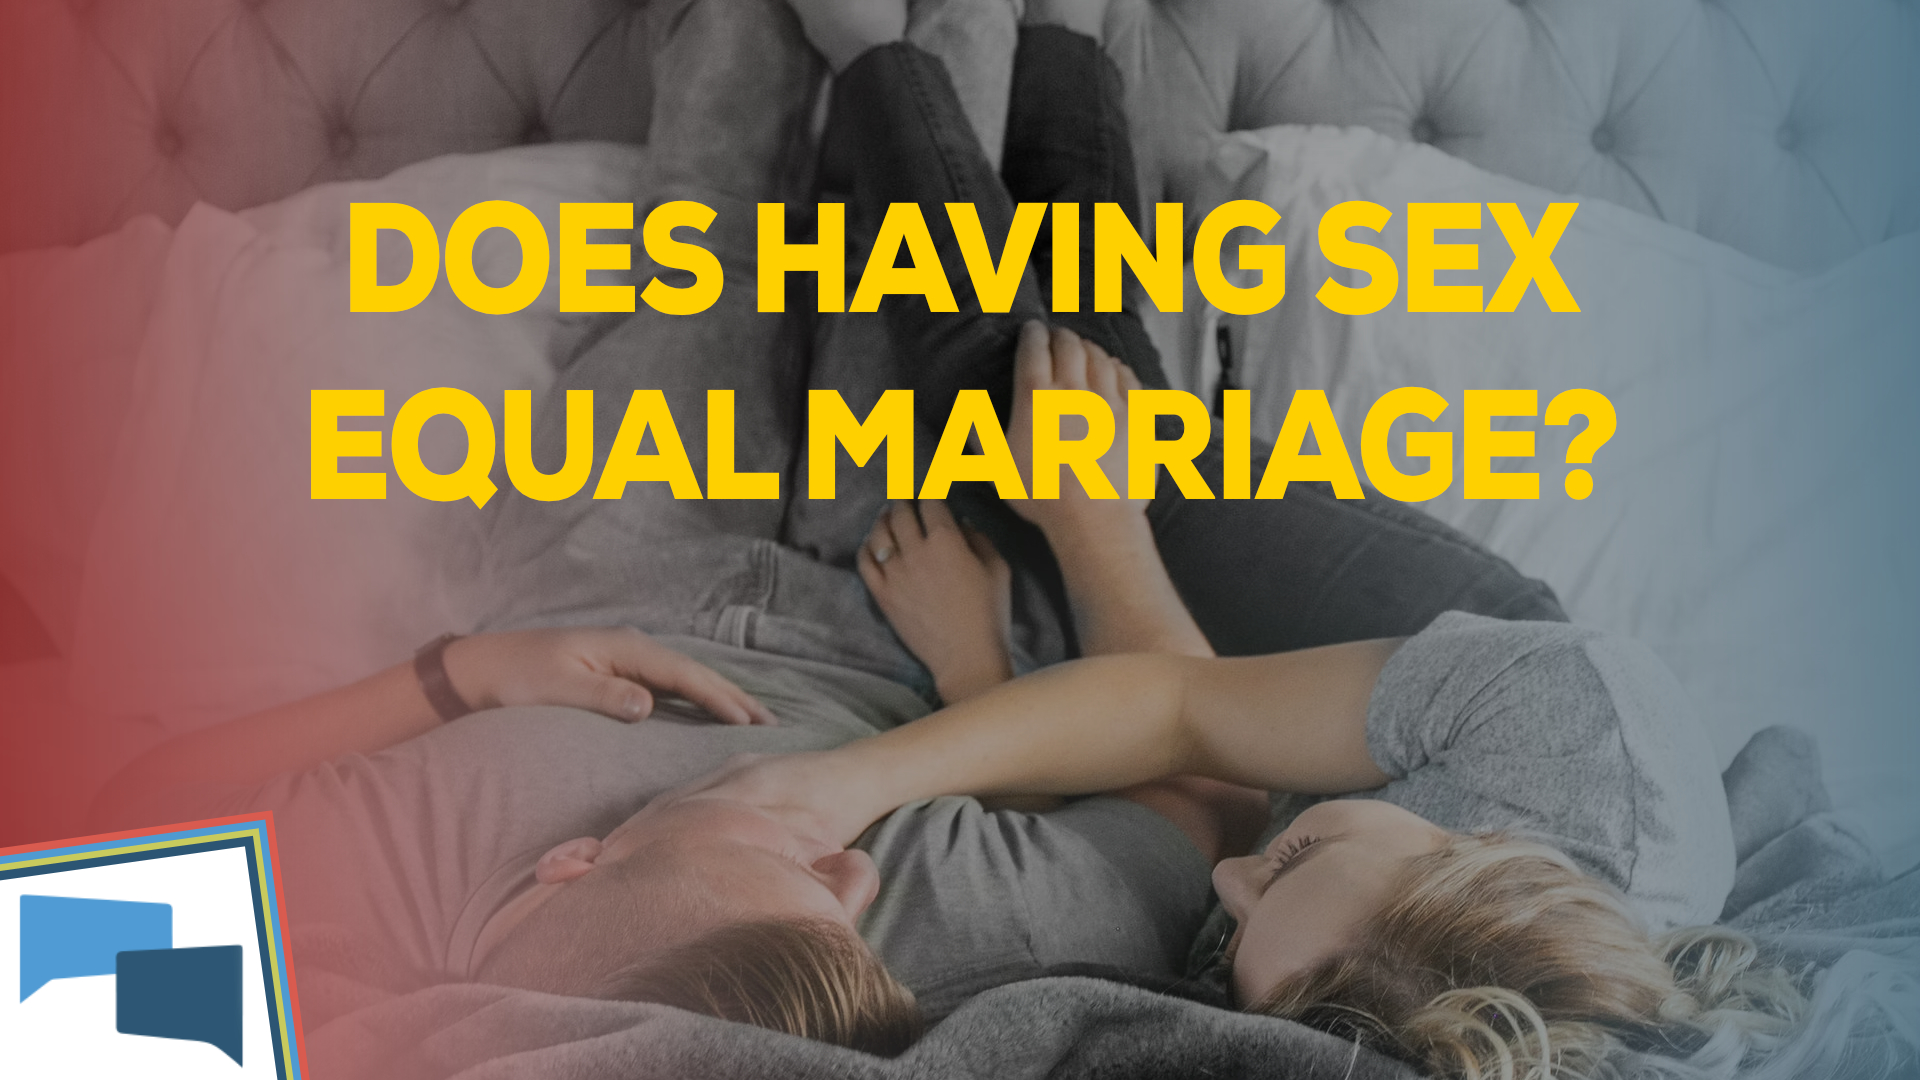 If an unmarried couple has sex, are they married in Gods eyes? GotQuestions image